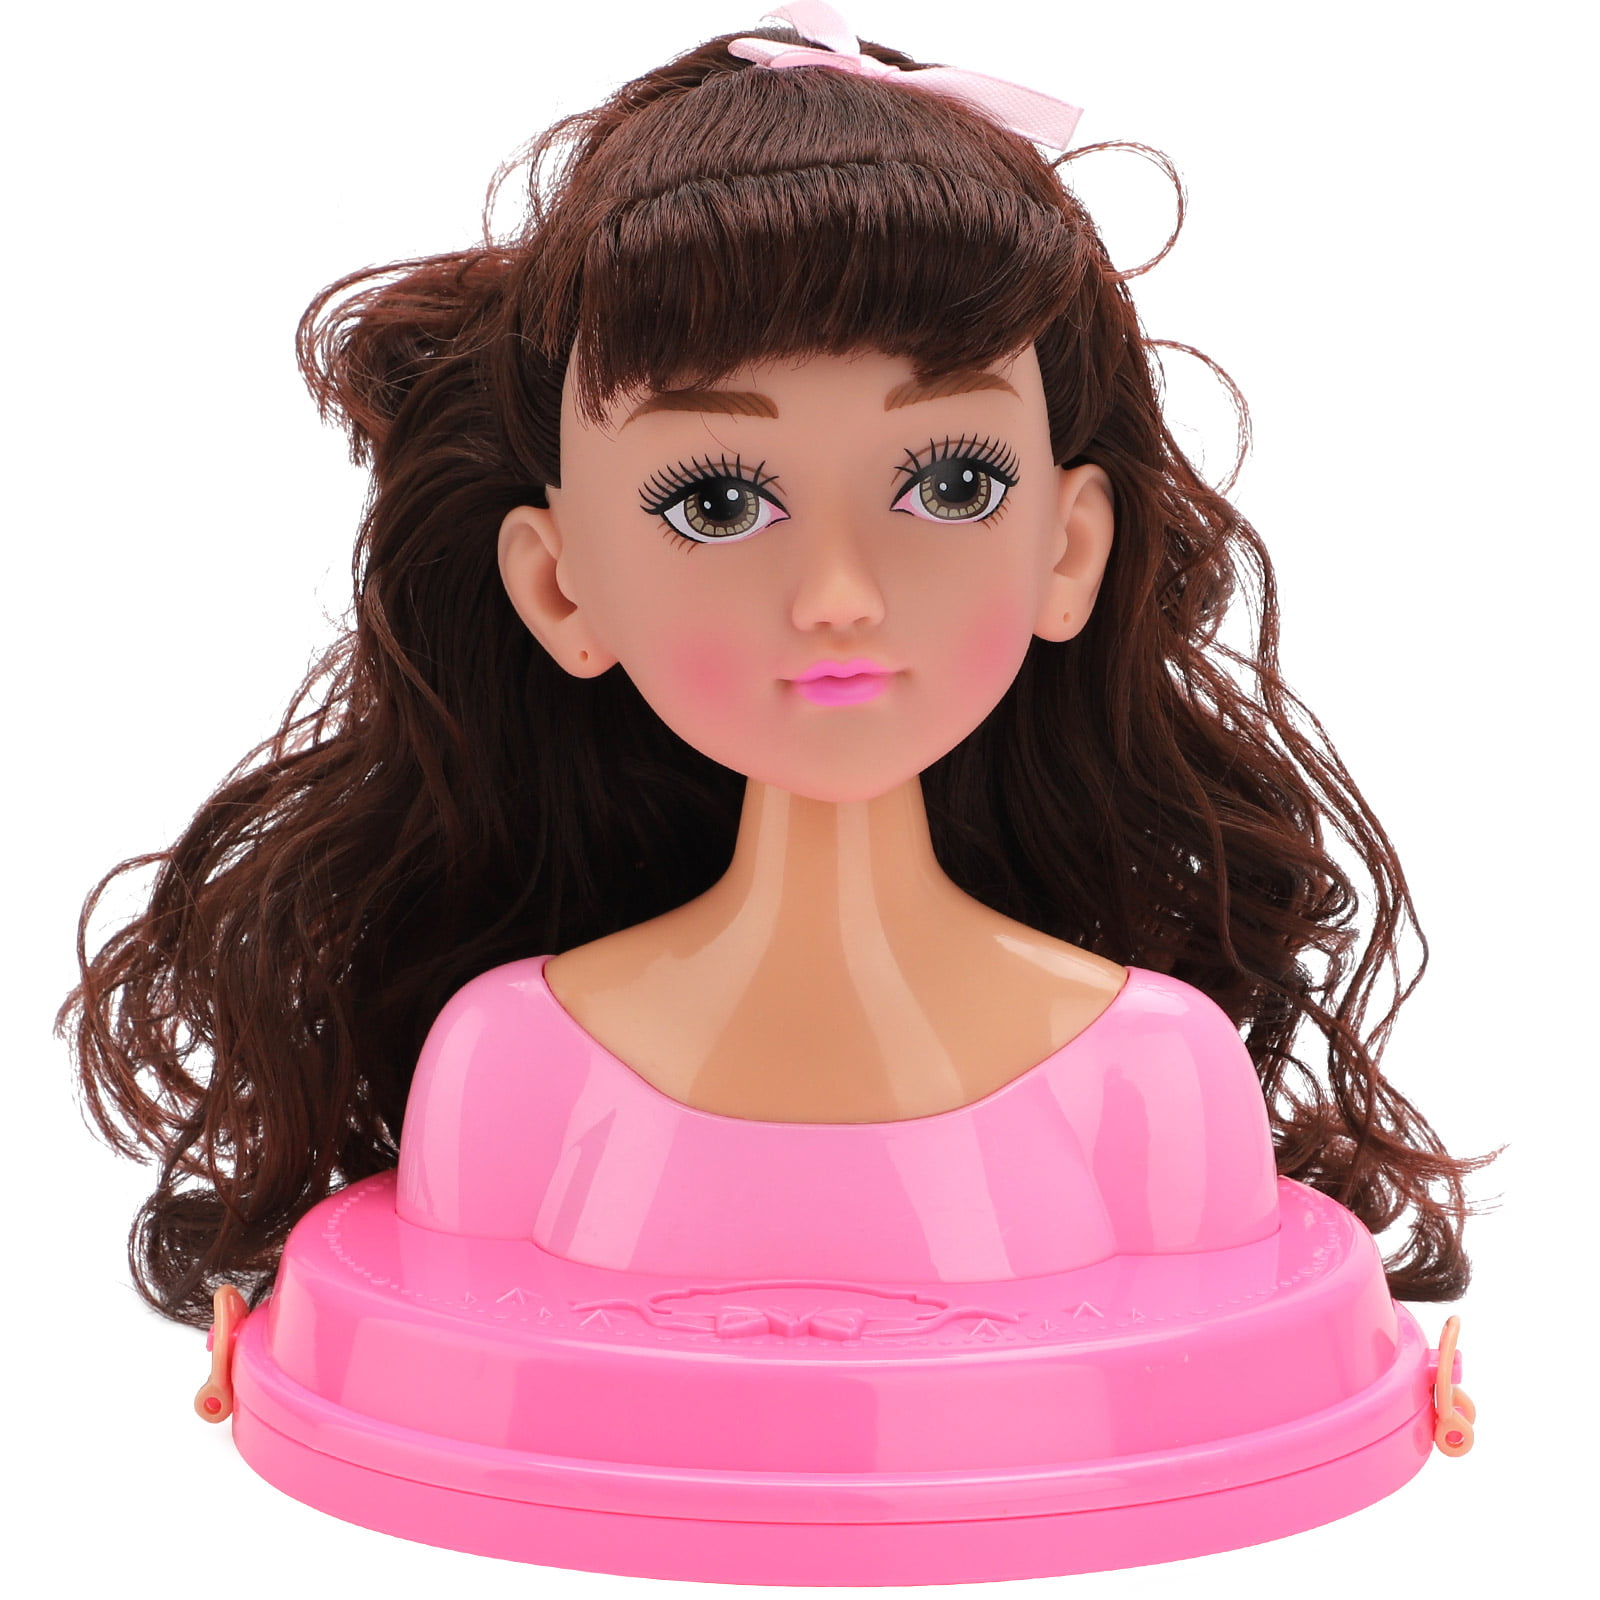 For 3-6 years)Kids Dolls Styling Head Makeup Comb Hair Toy Doll